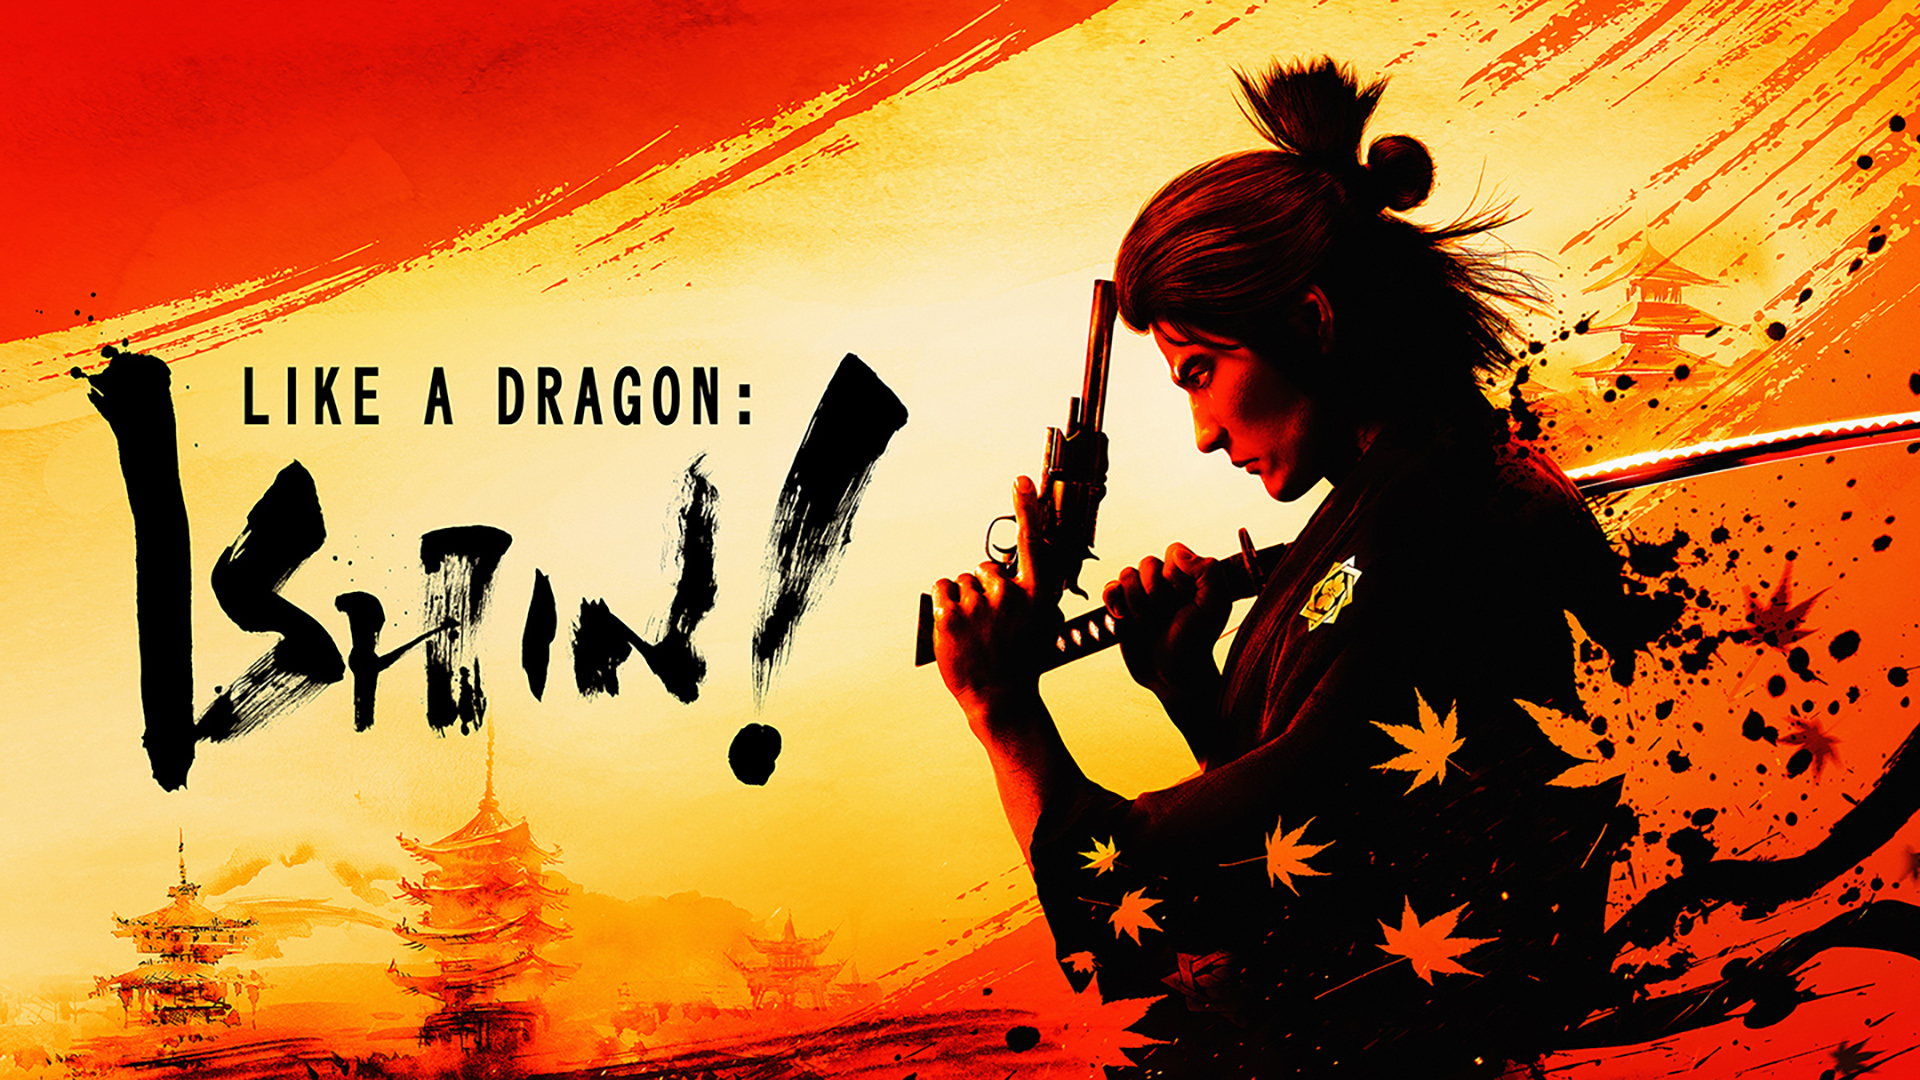 Samurai Epic Like a Dragon: Ishin! Is Out Now